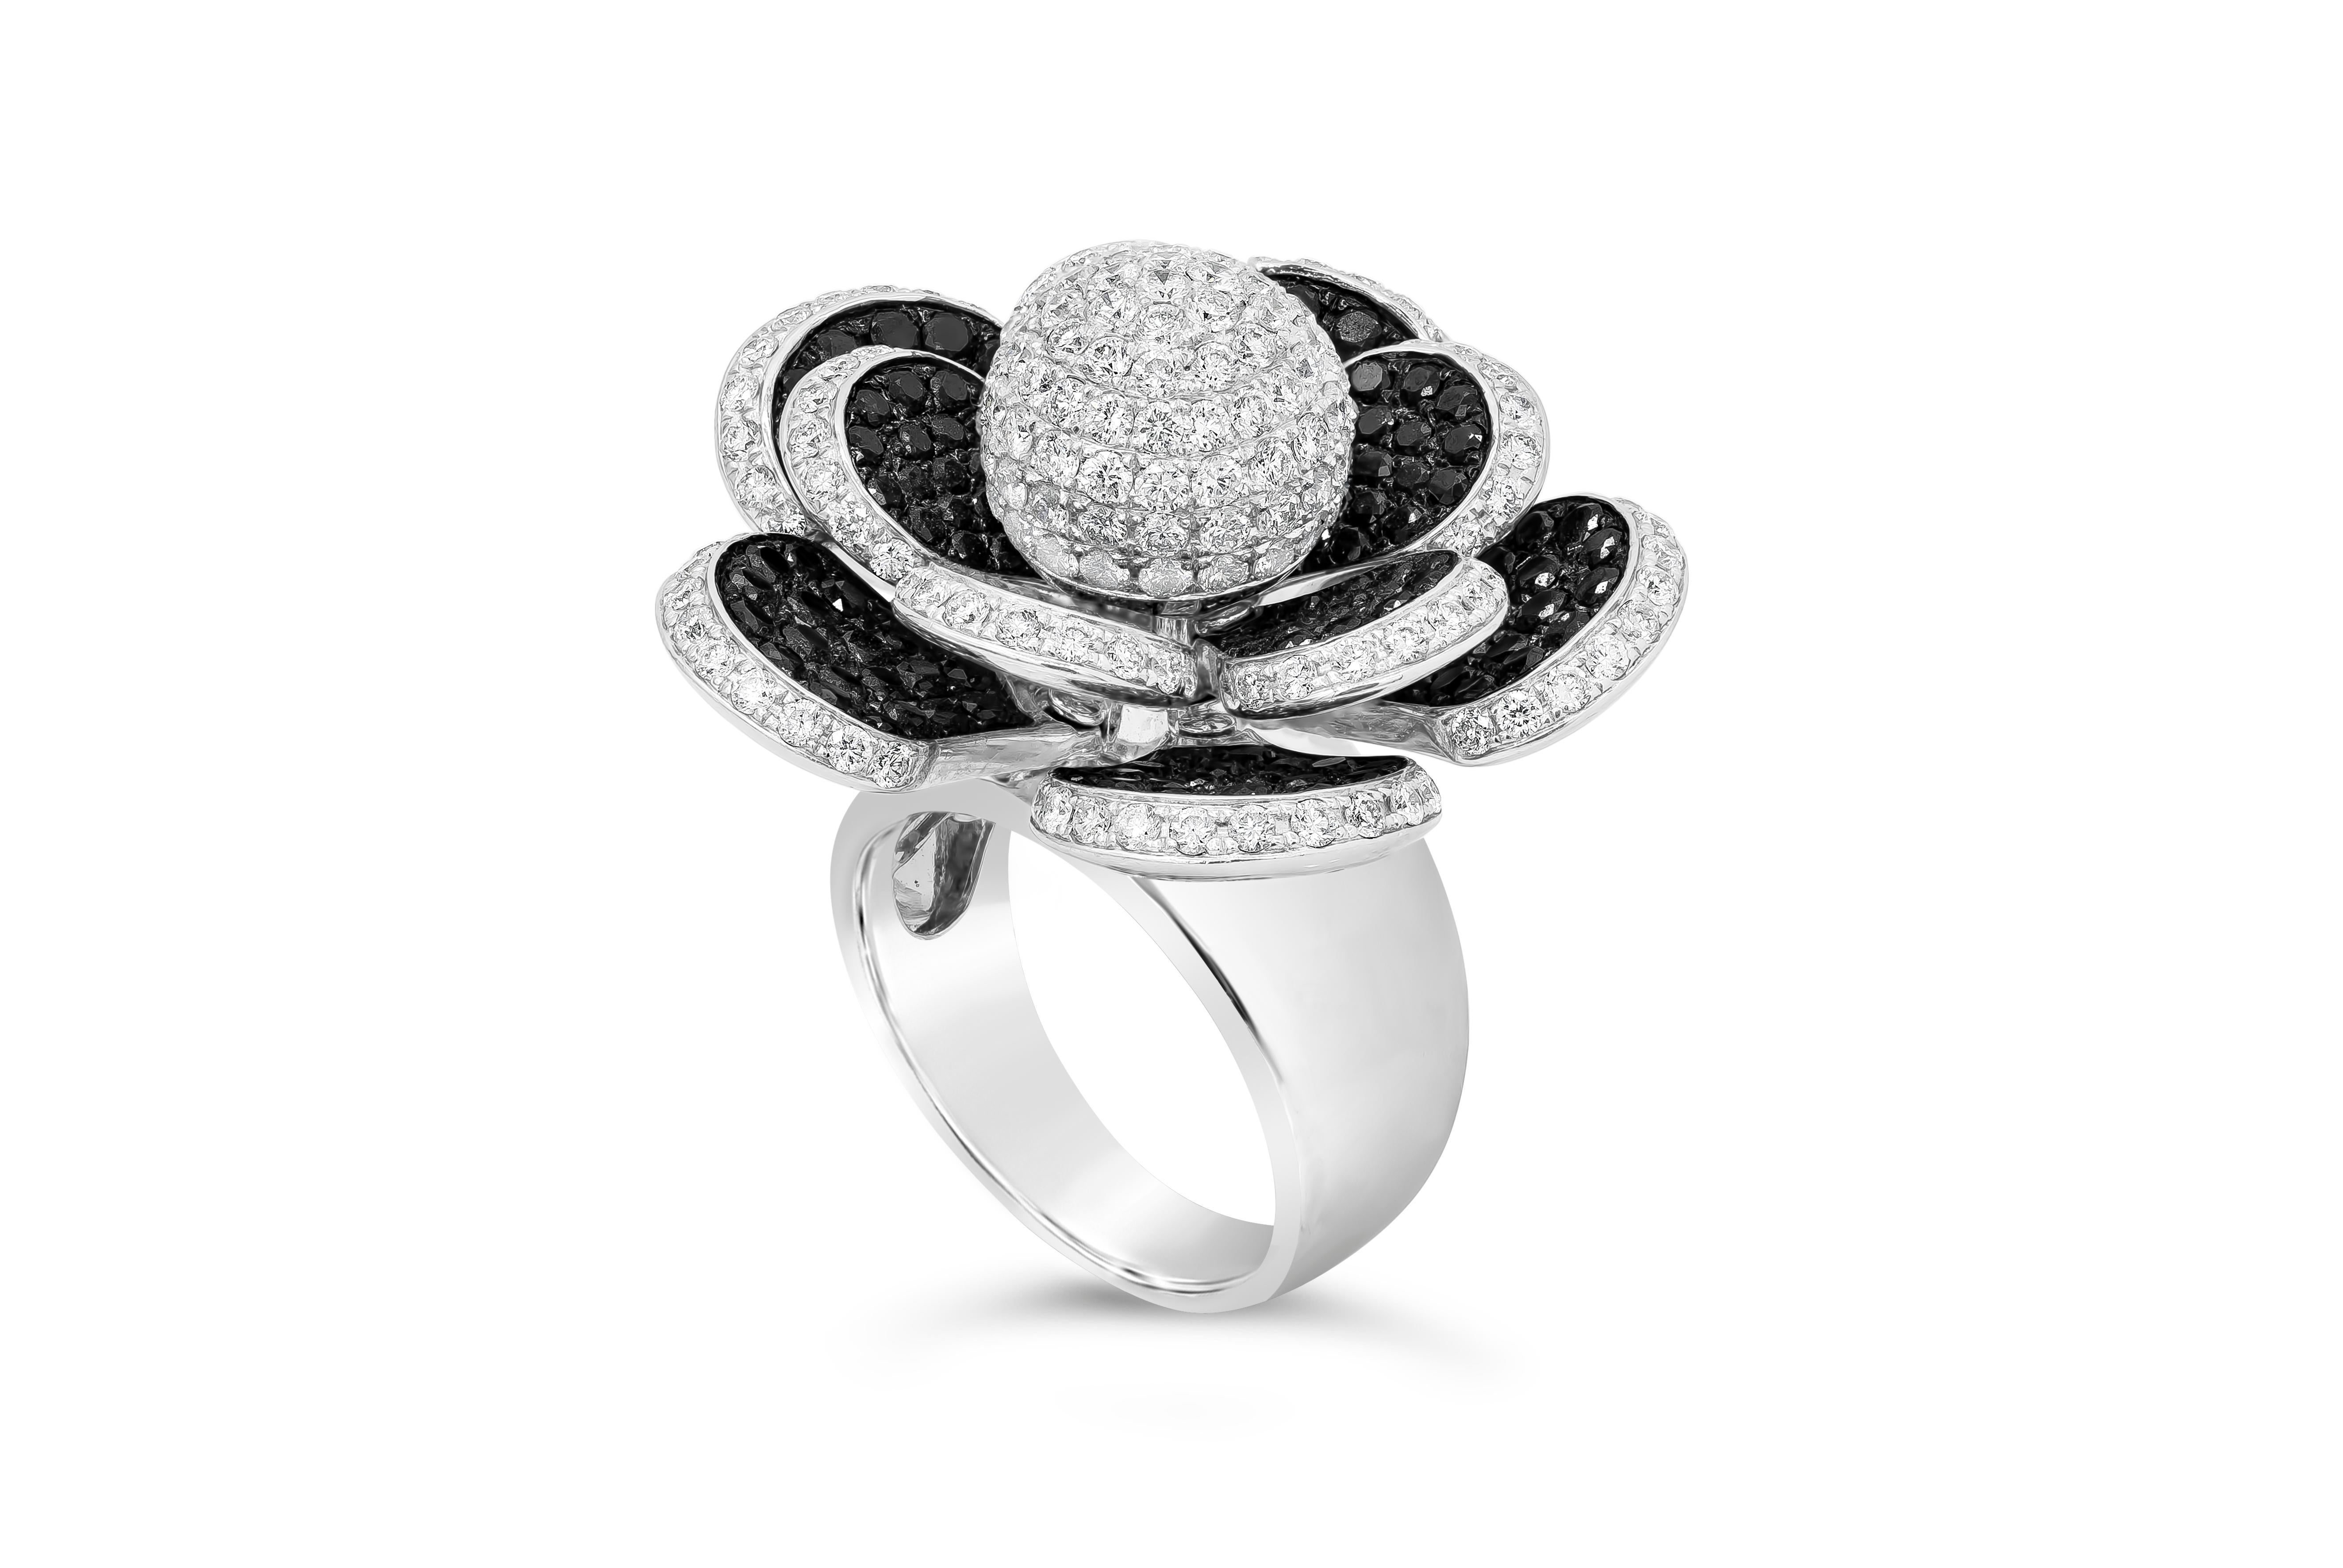 A fashionable ring showcasing a round ball set with round brilliant diamonds, surrounded by flower petals encrusted with black and white diamonds. The petals are movable and rotates around the center. Black diamonds weigh 3.33 carats total; white